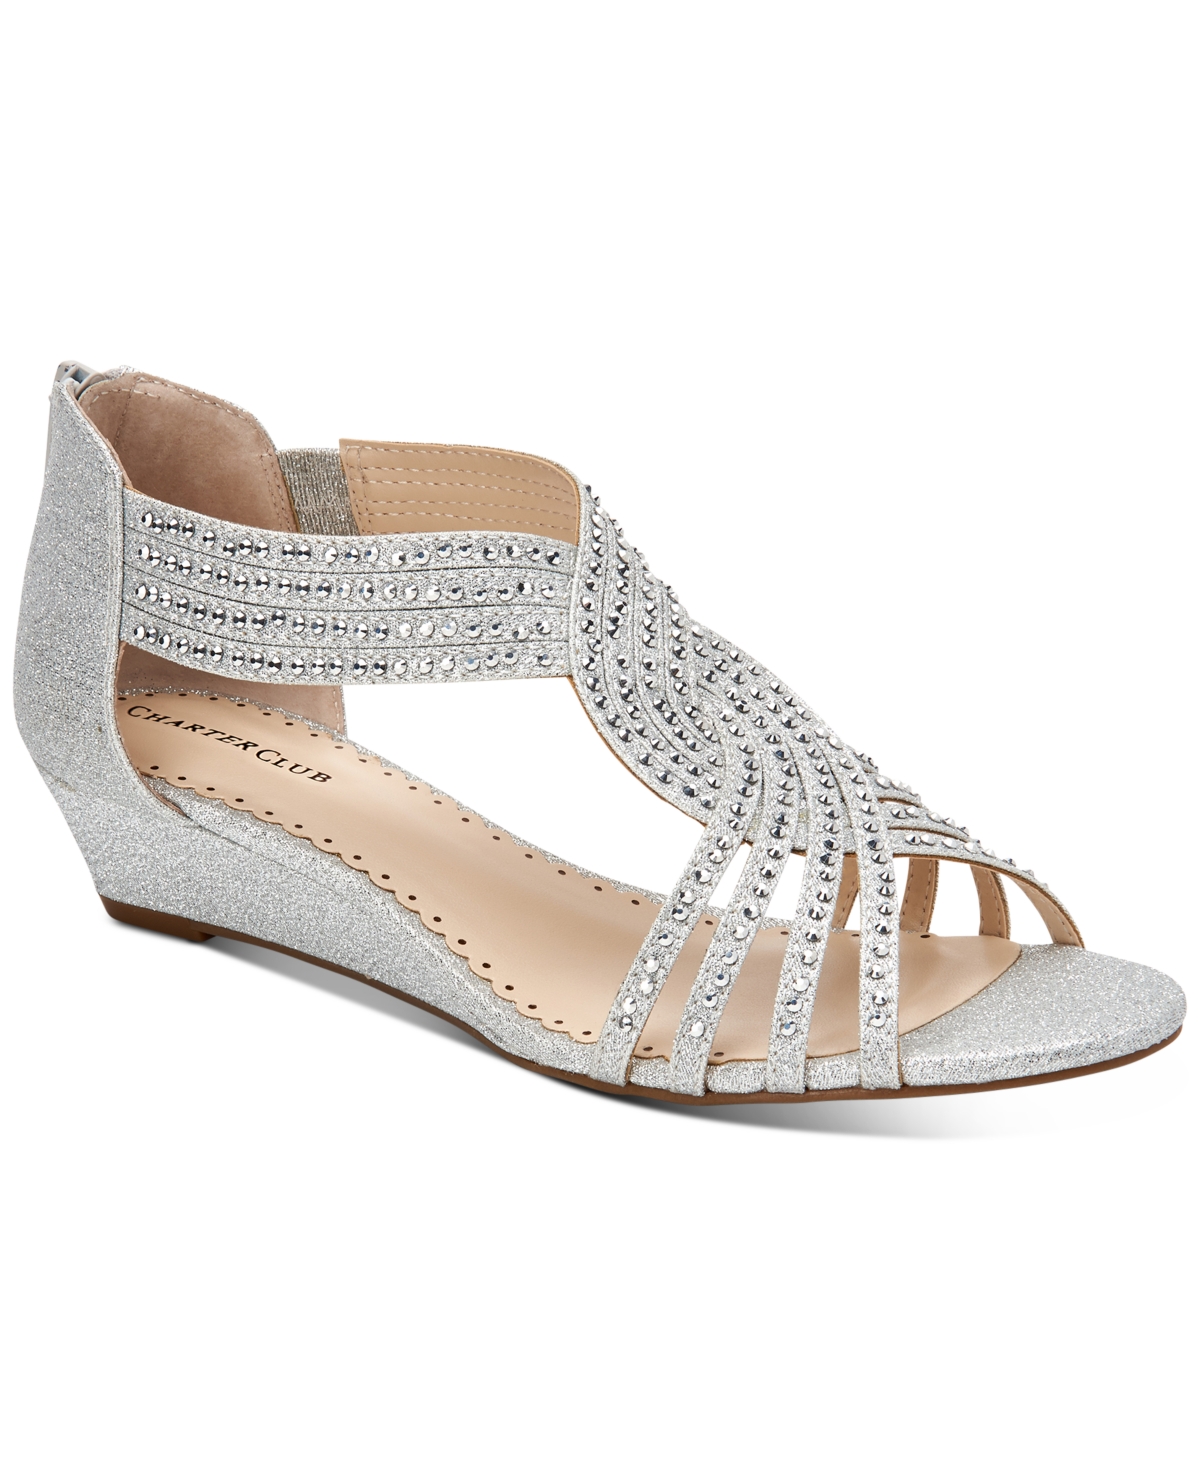 Ginifur Wedge Sandals, Created for Macy's - Silver